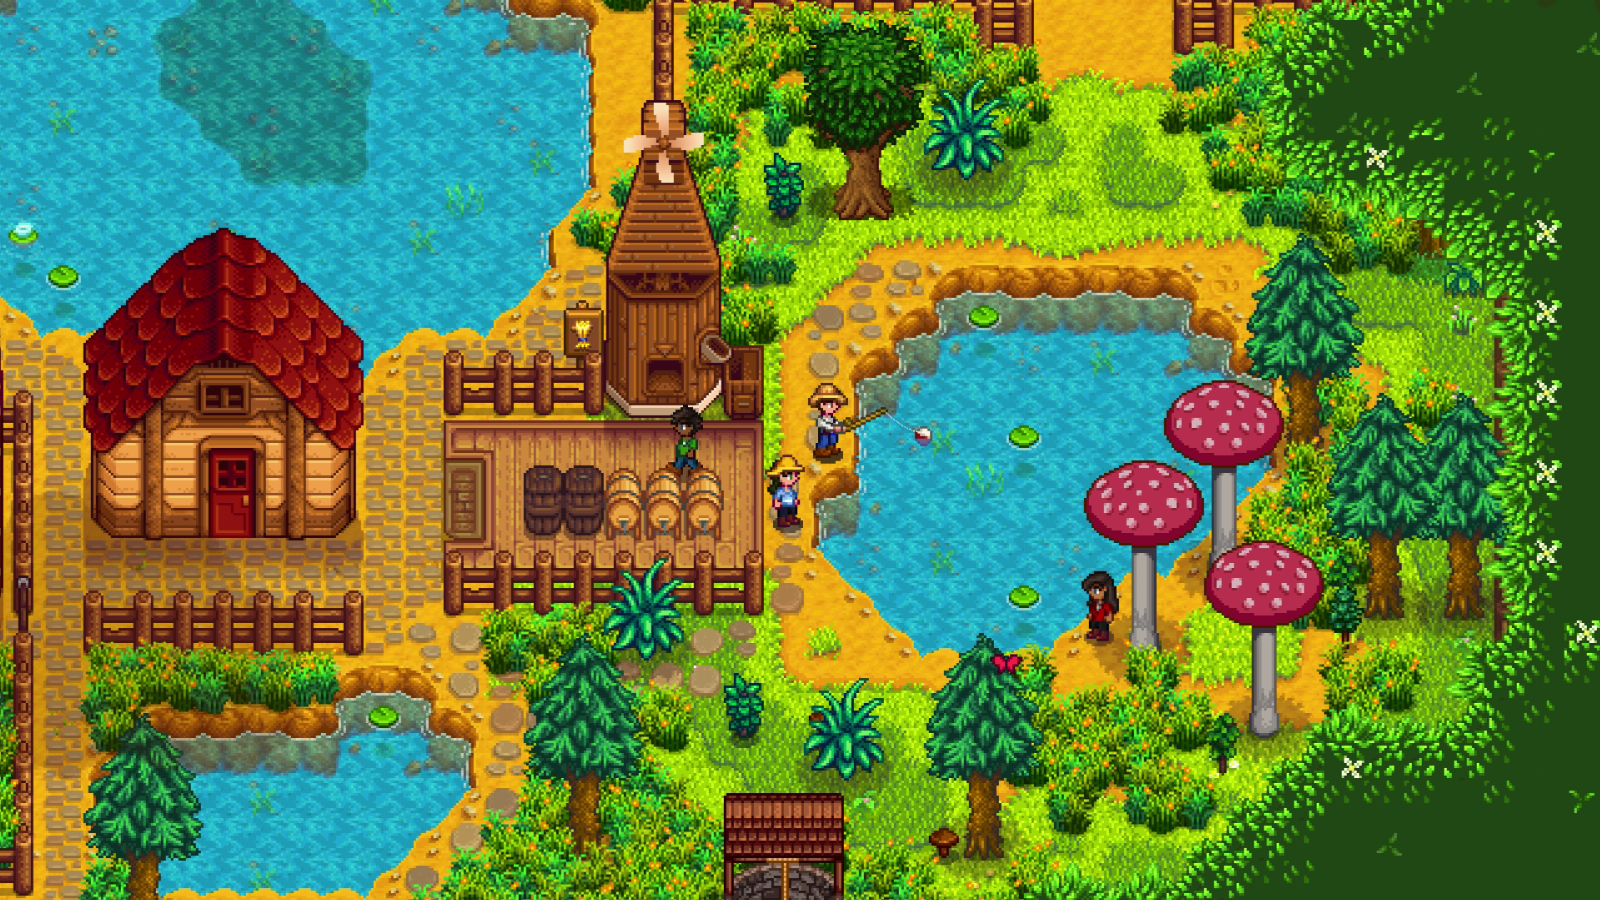 Apple Arcade is adding Stardew Valley, Ridiculous Fishing and more in July